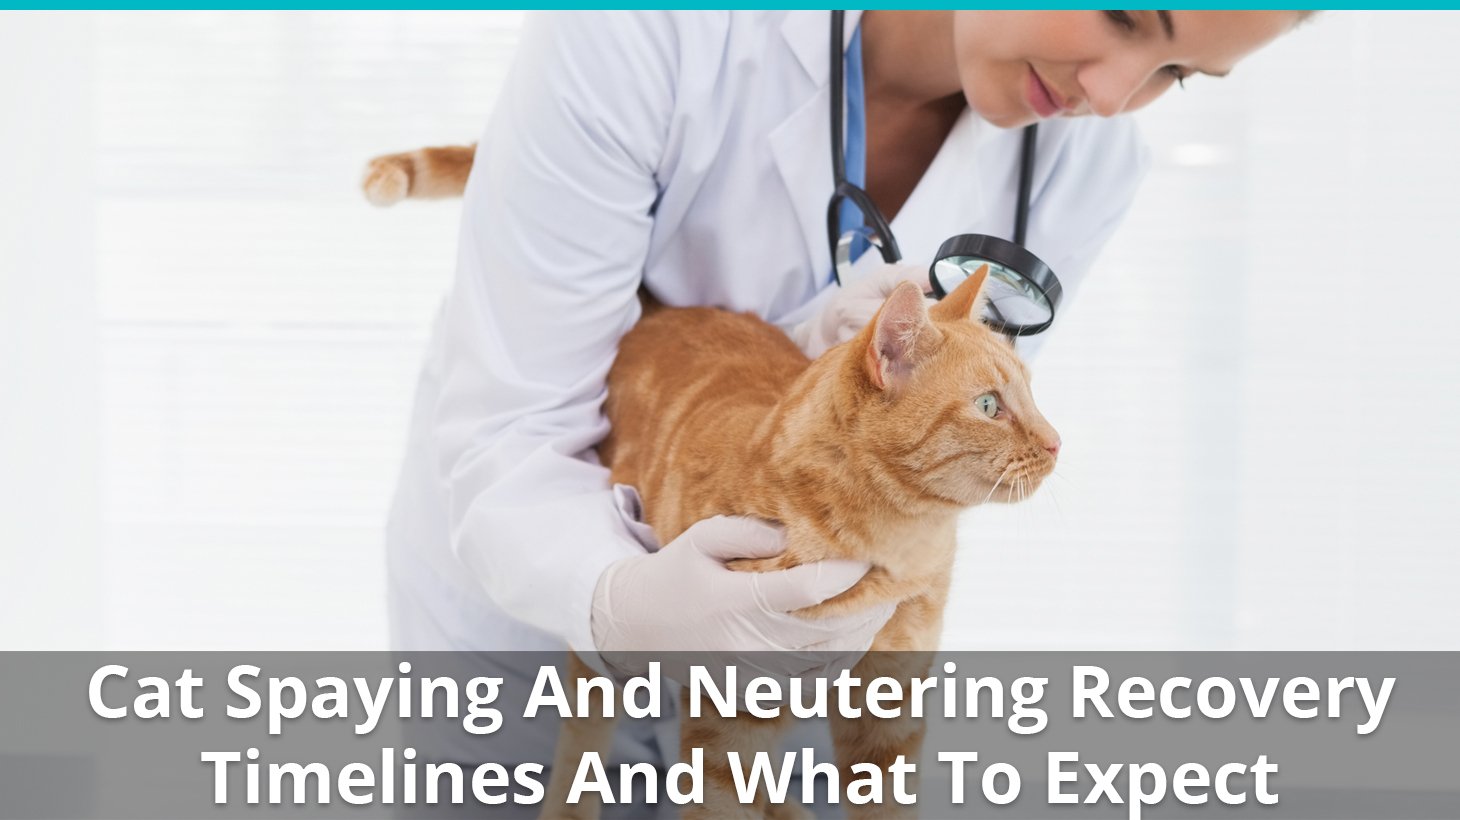 cats after being neutered